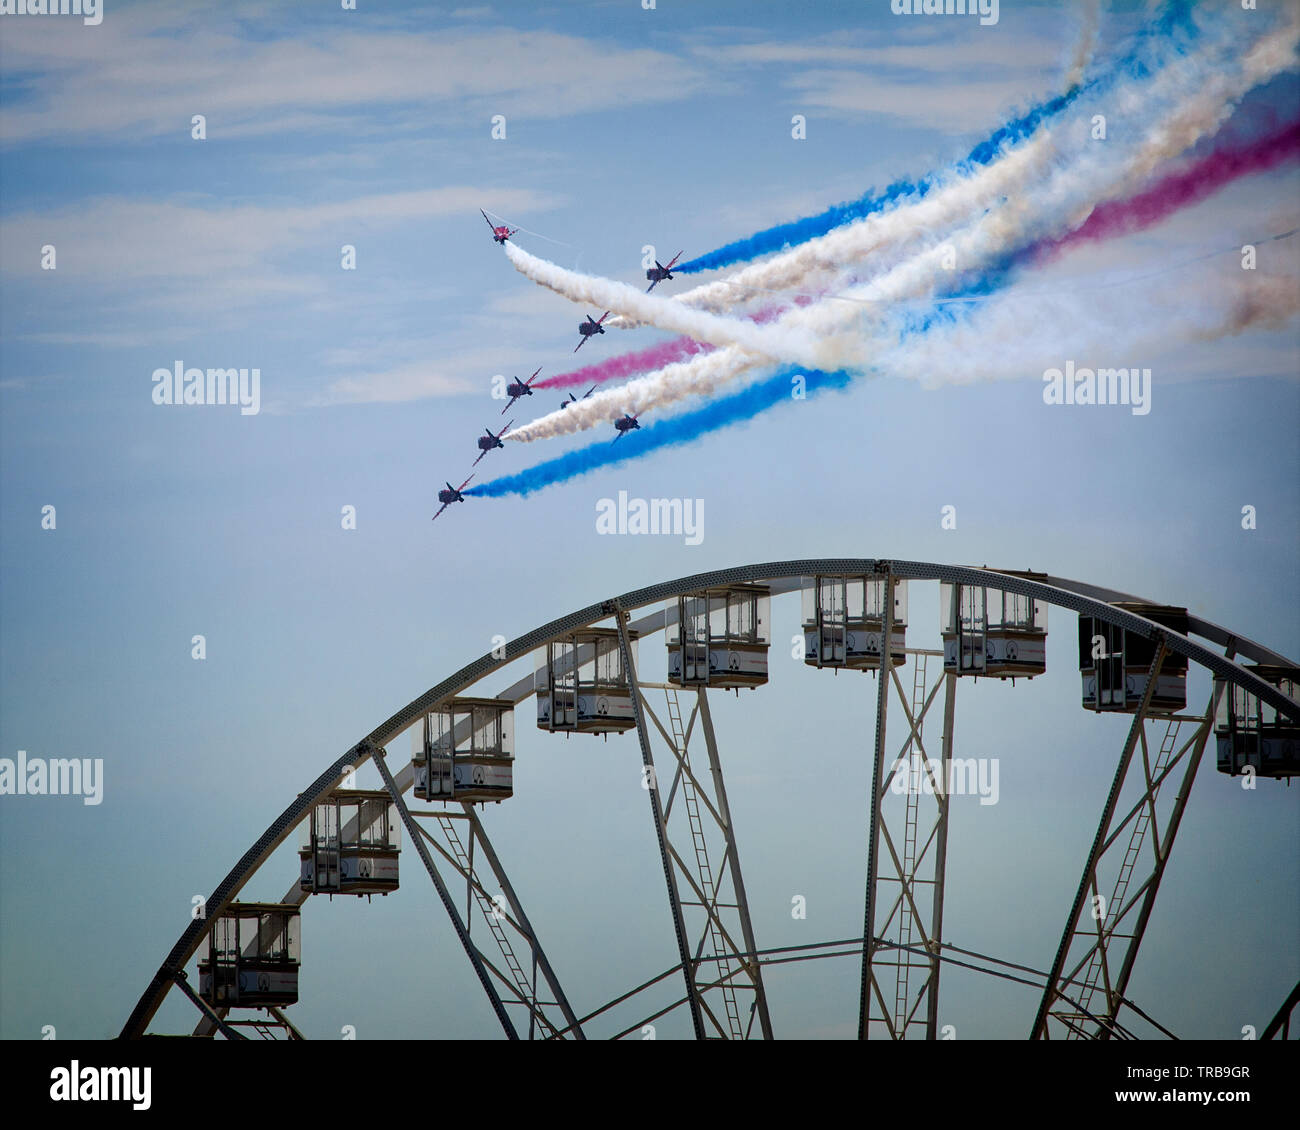 GB - DEVON: RAF Red Arrows Display Team at the Torbay Airshow flying over English Riviera Wheel at Torquay (31. May 2019) Stock Photo